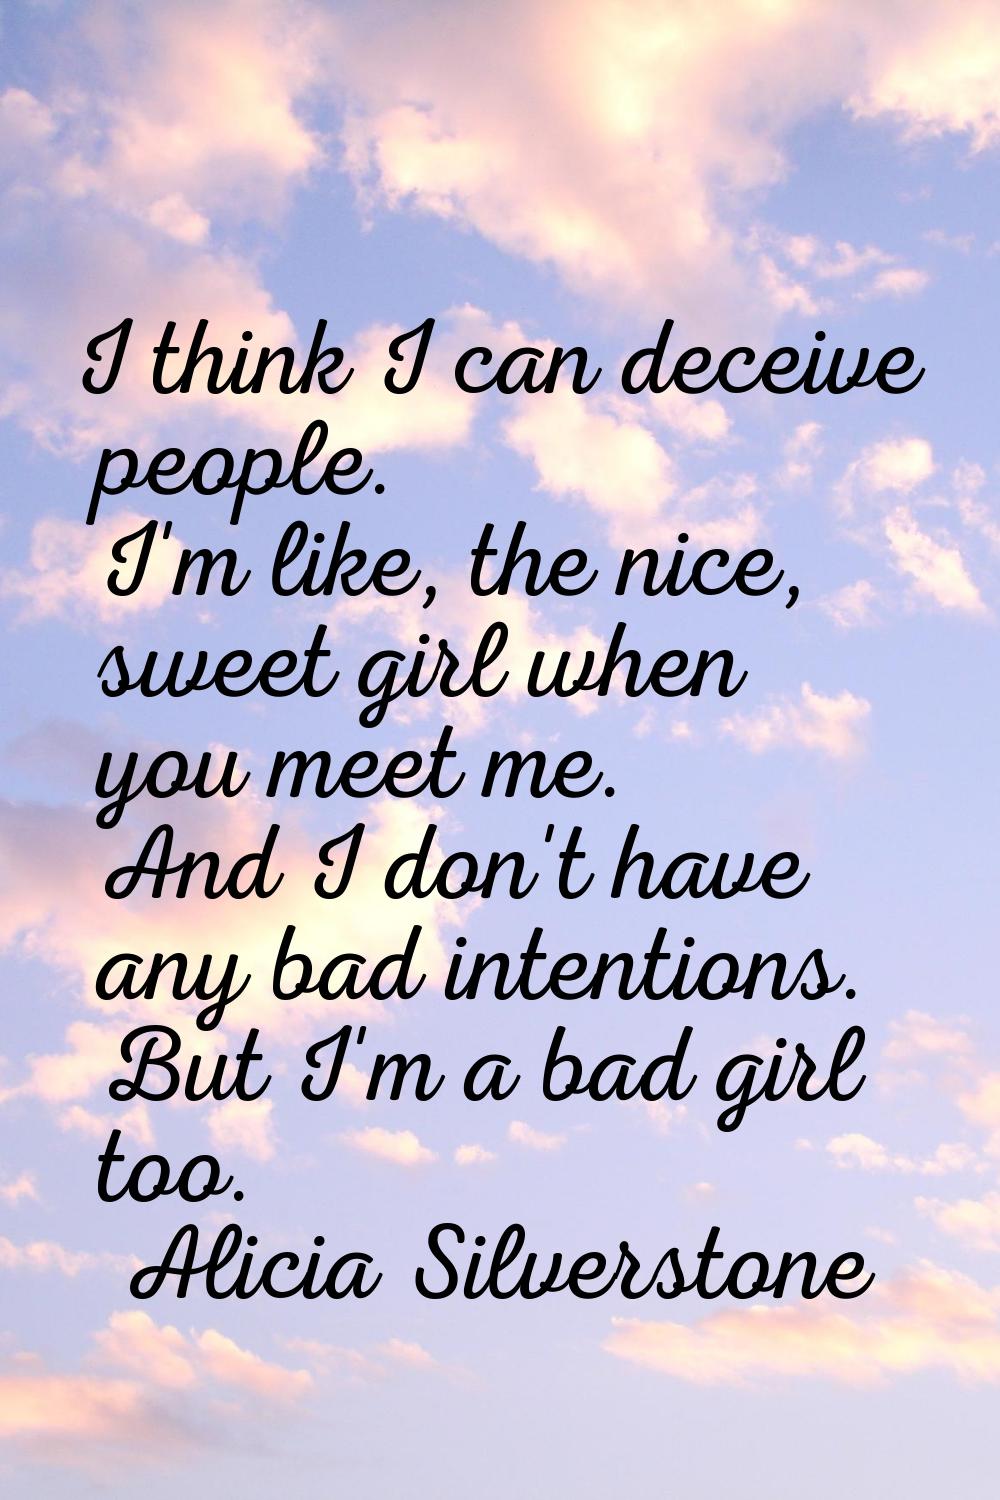 I think I can deceive people. I'm like, the nice, sweet girl when you meet me. And I don't have any